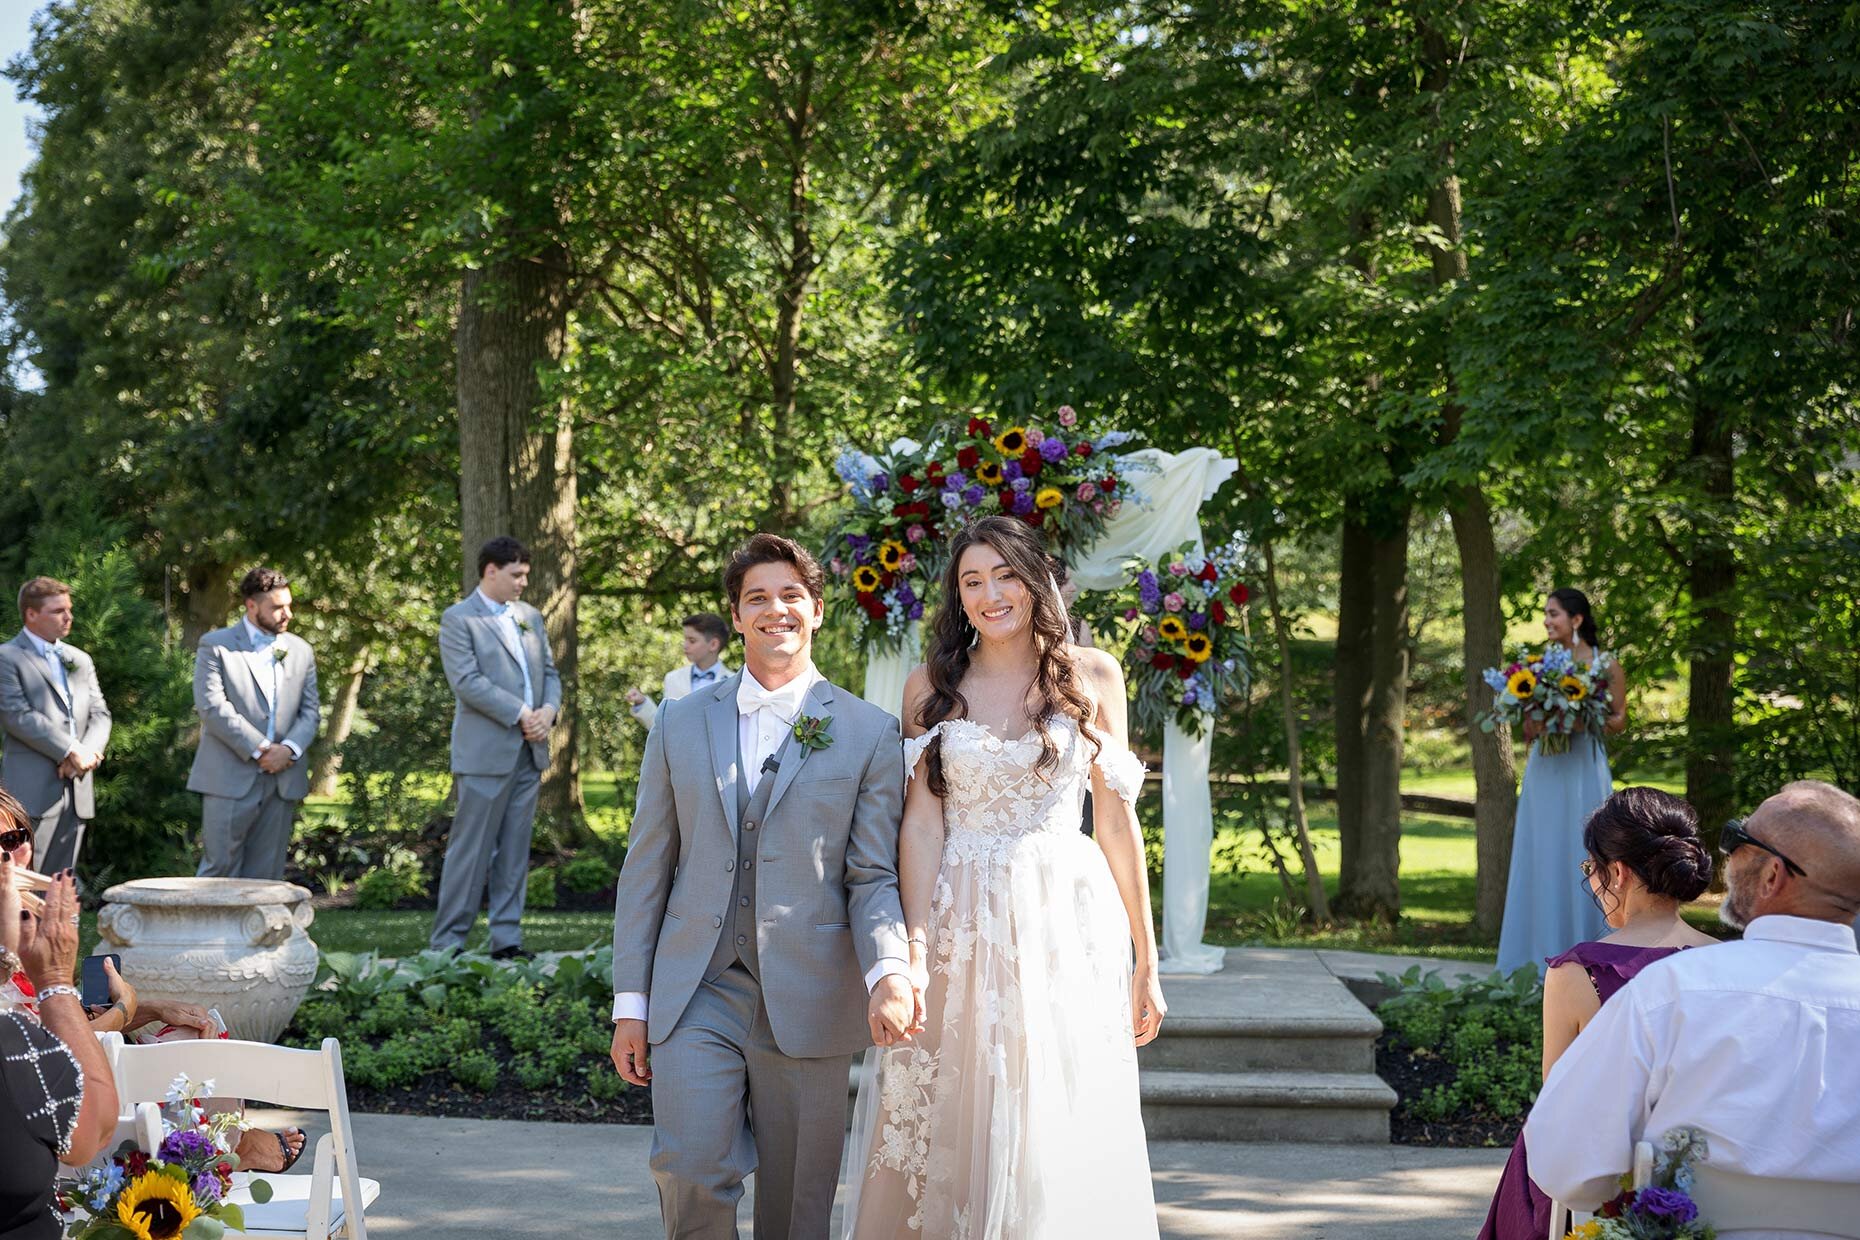 Recessional bride and groom walking down the aisle